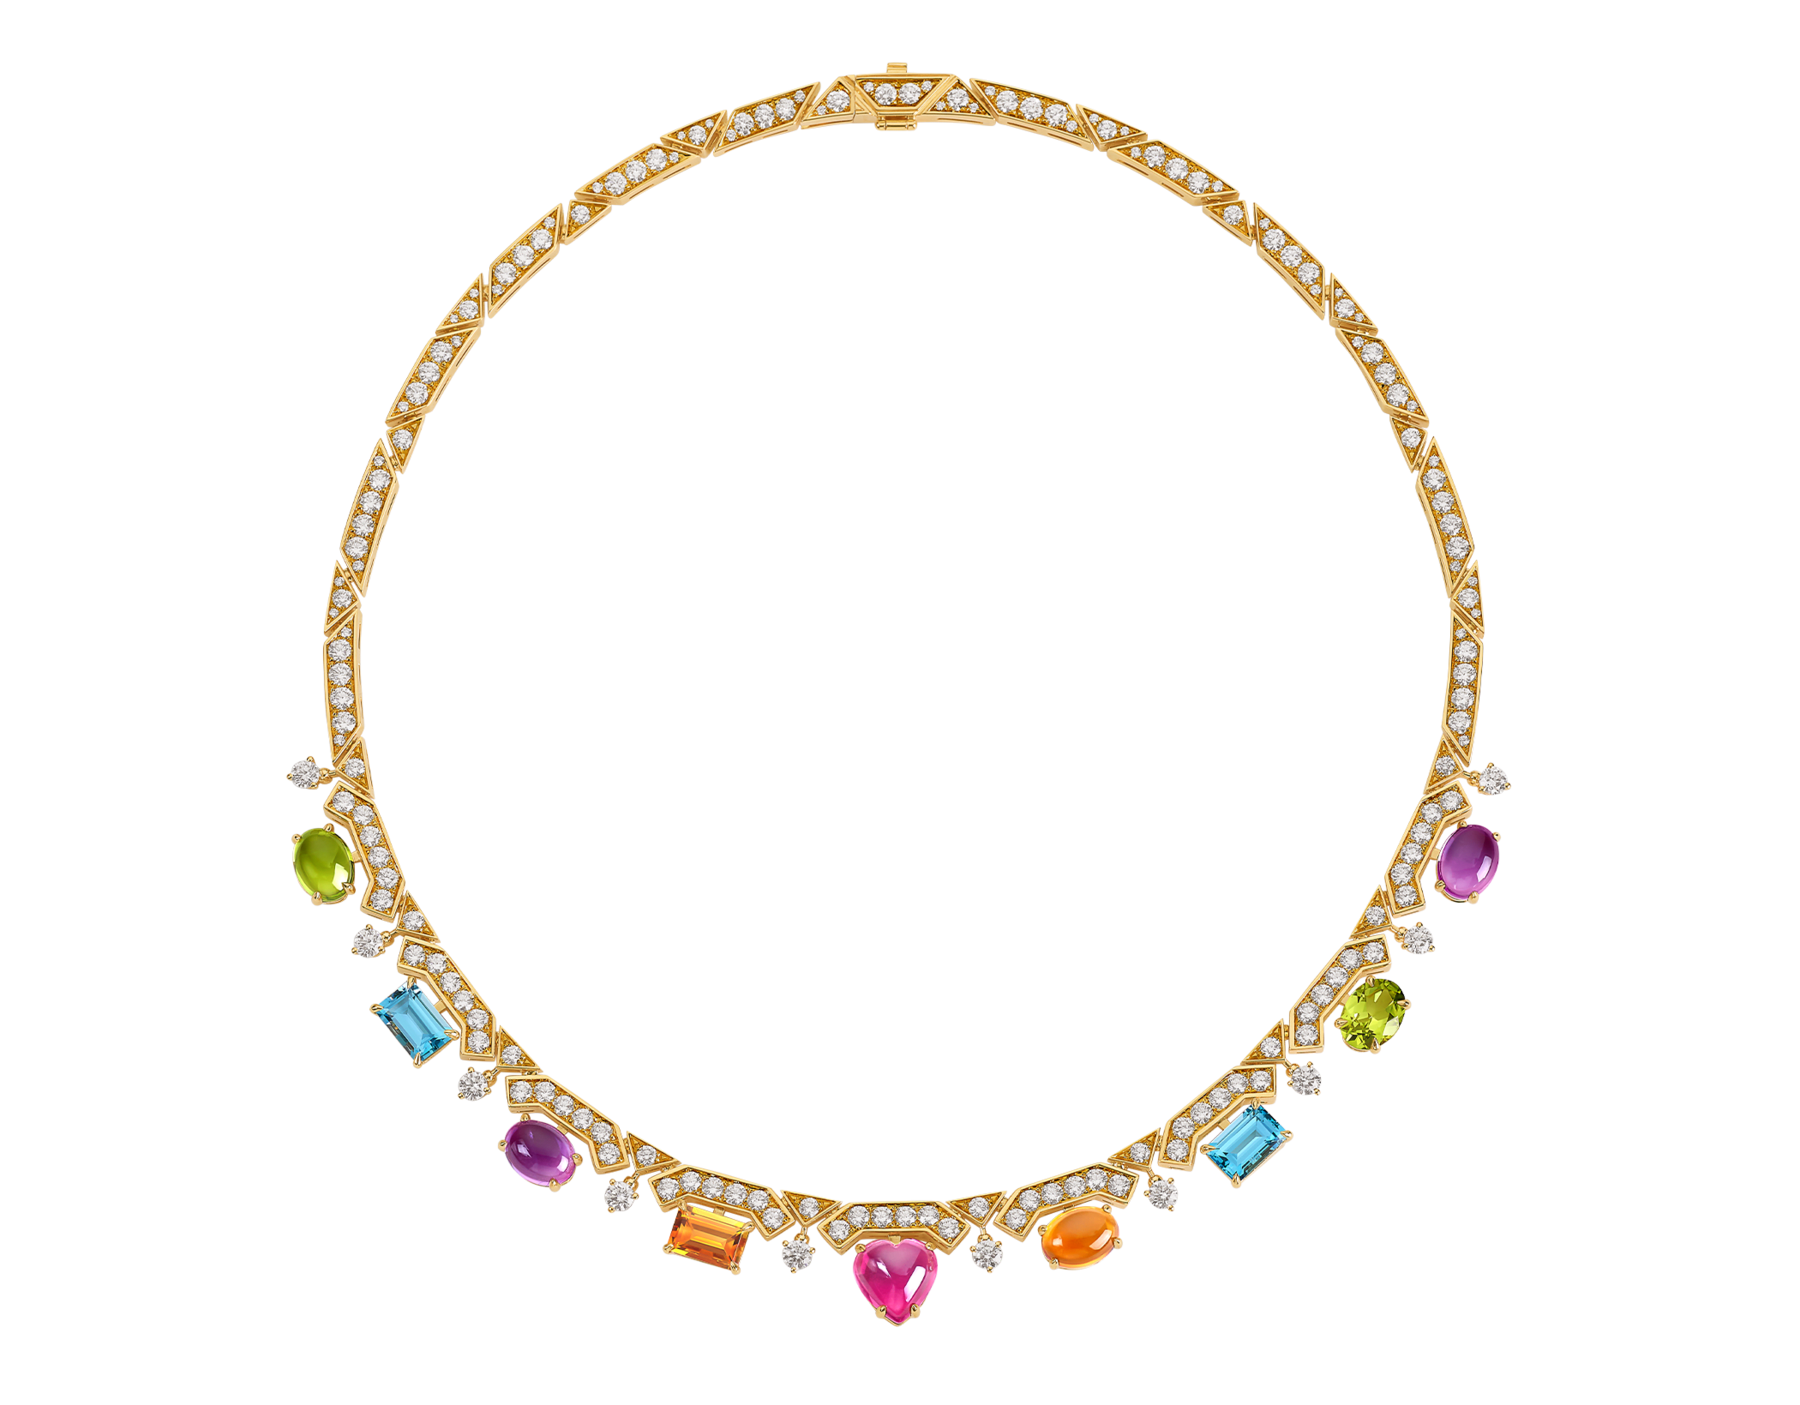 Allegra 18 kt yellow gold necklace set with amethysts, peridots, pink tourmalines, citrine quartzes, blue topazes and pavé diamonds CL859870 image 1